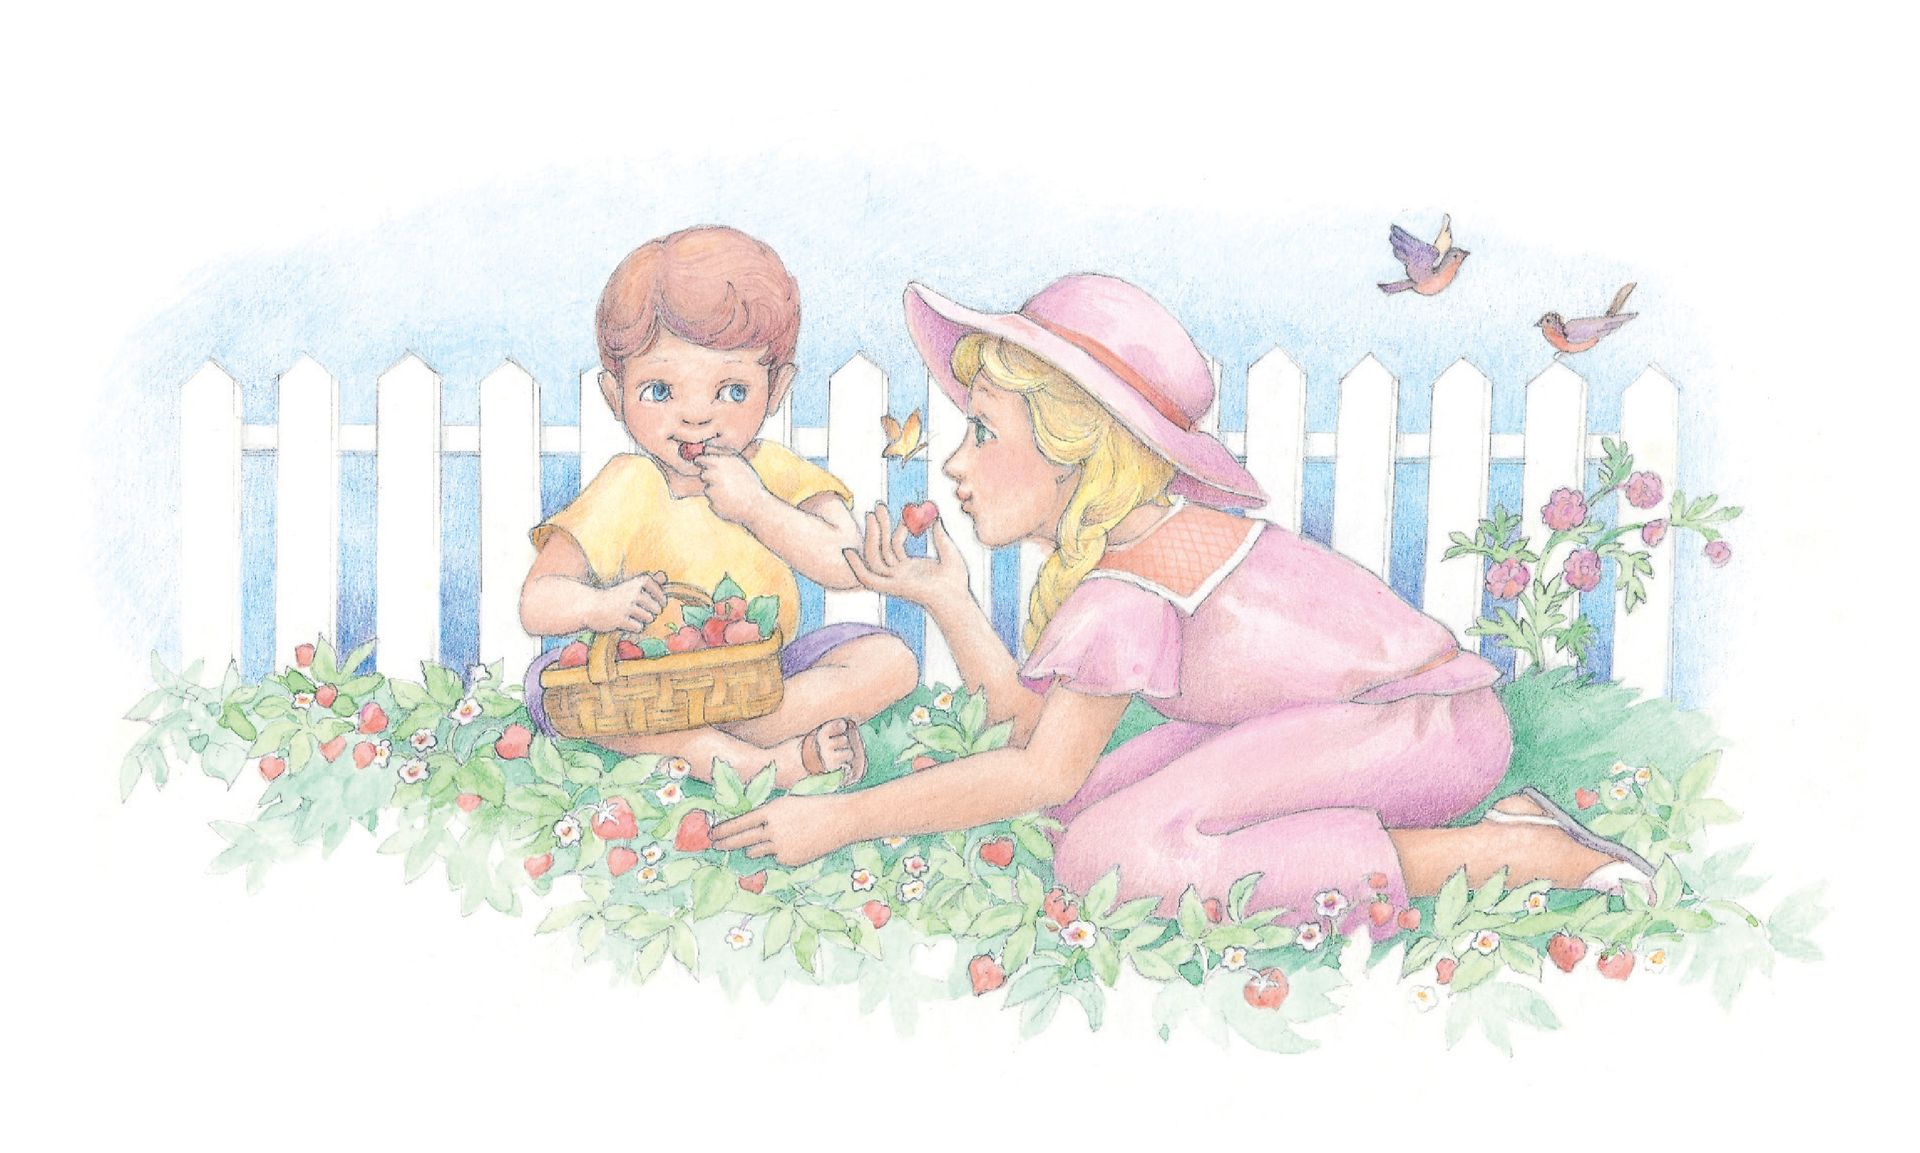 Two children eating strawberries in a garden. From the Children’s Songbook, page 24, “Thank Thee, Father”; watercolor illustration by Phyllis Luch.